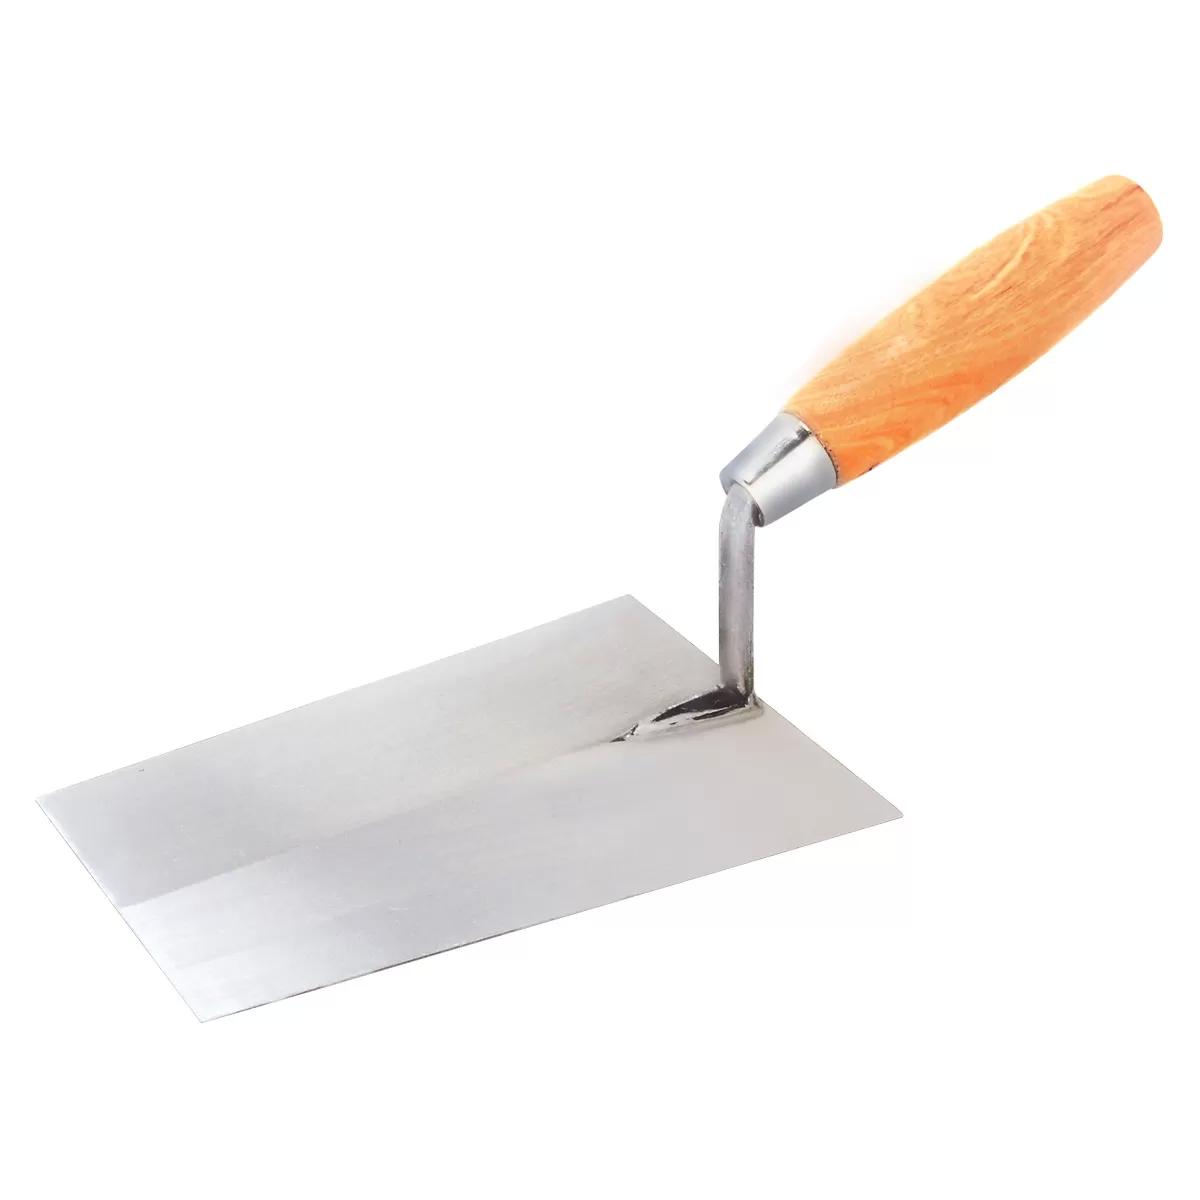 Bricklaying trowel wooden handle, square shape 180mm 